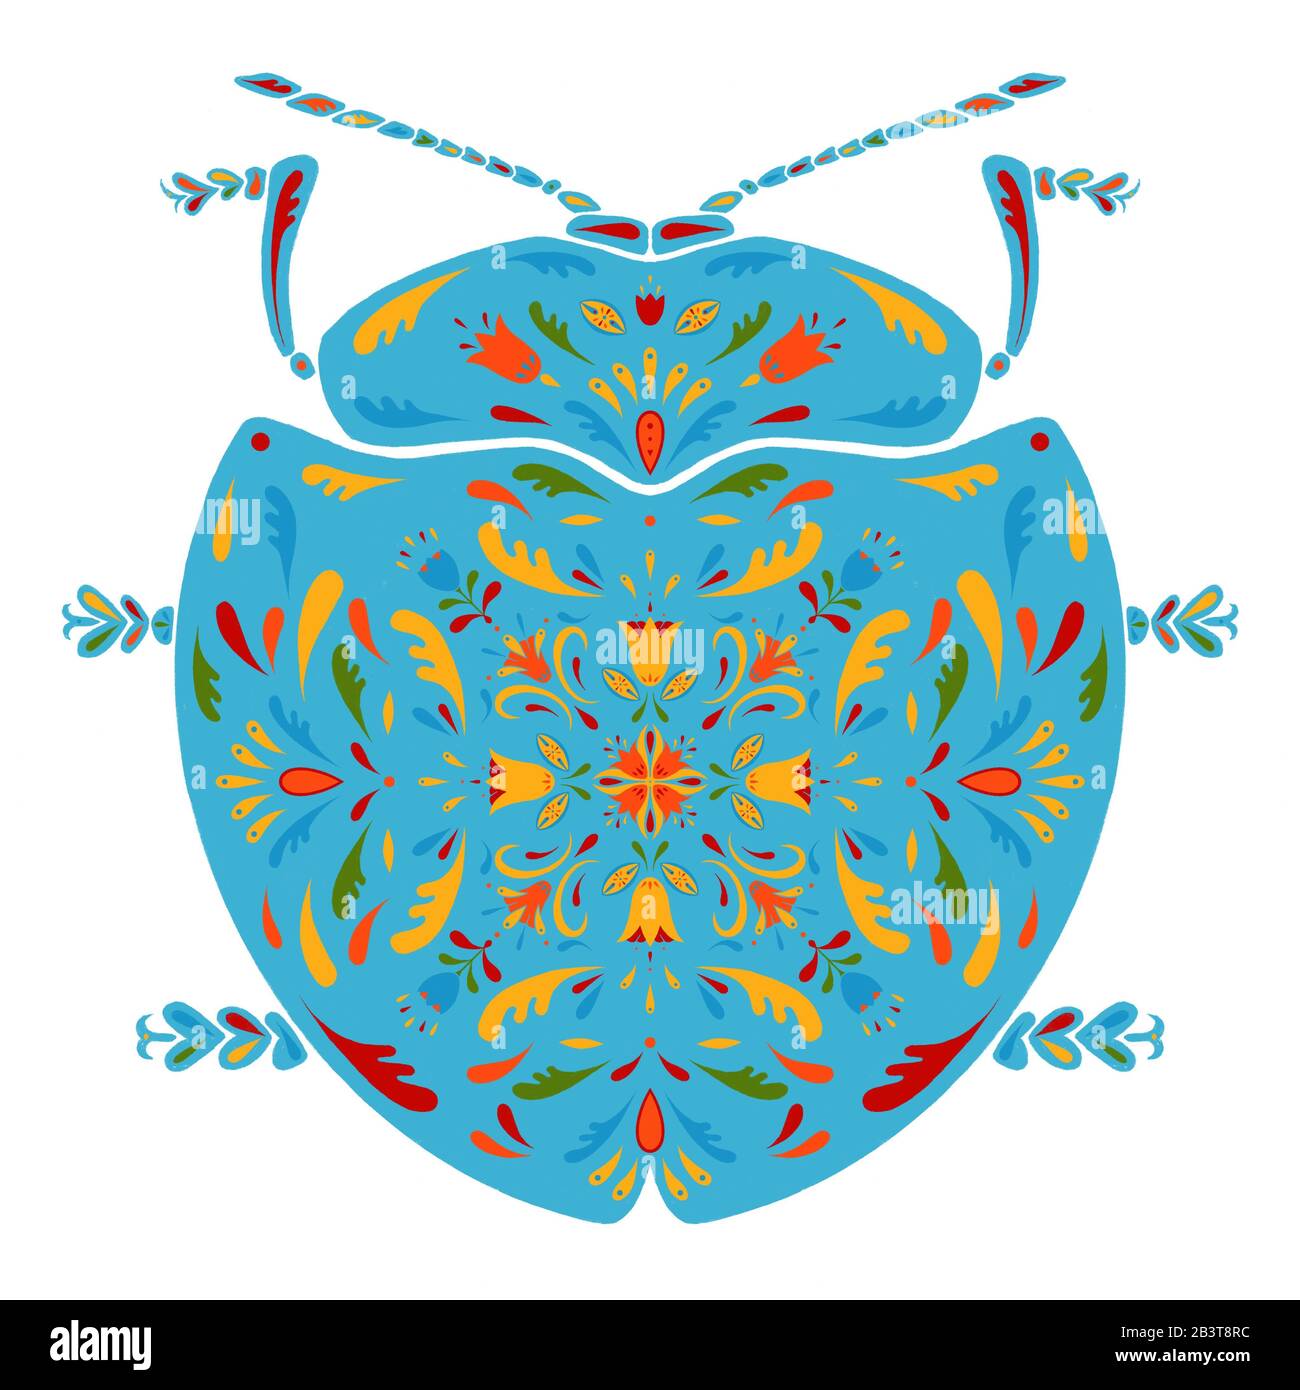 Cyrtonota sexpustulata. An illustration, a graphic with the light blue beetle isolated on a white background. Ornamental, ornately decorated beetle. Stock Photo